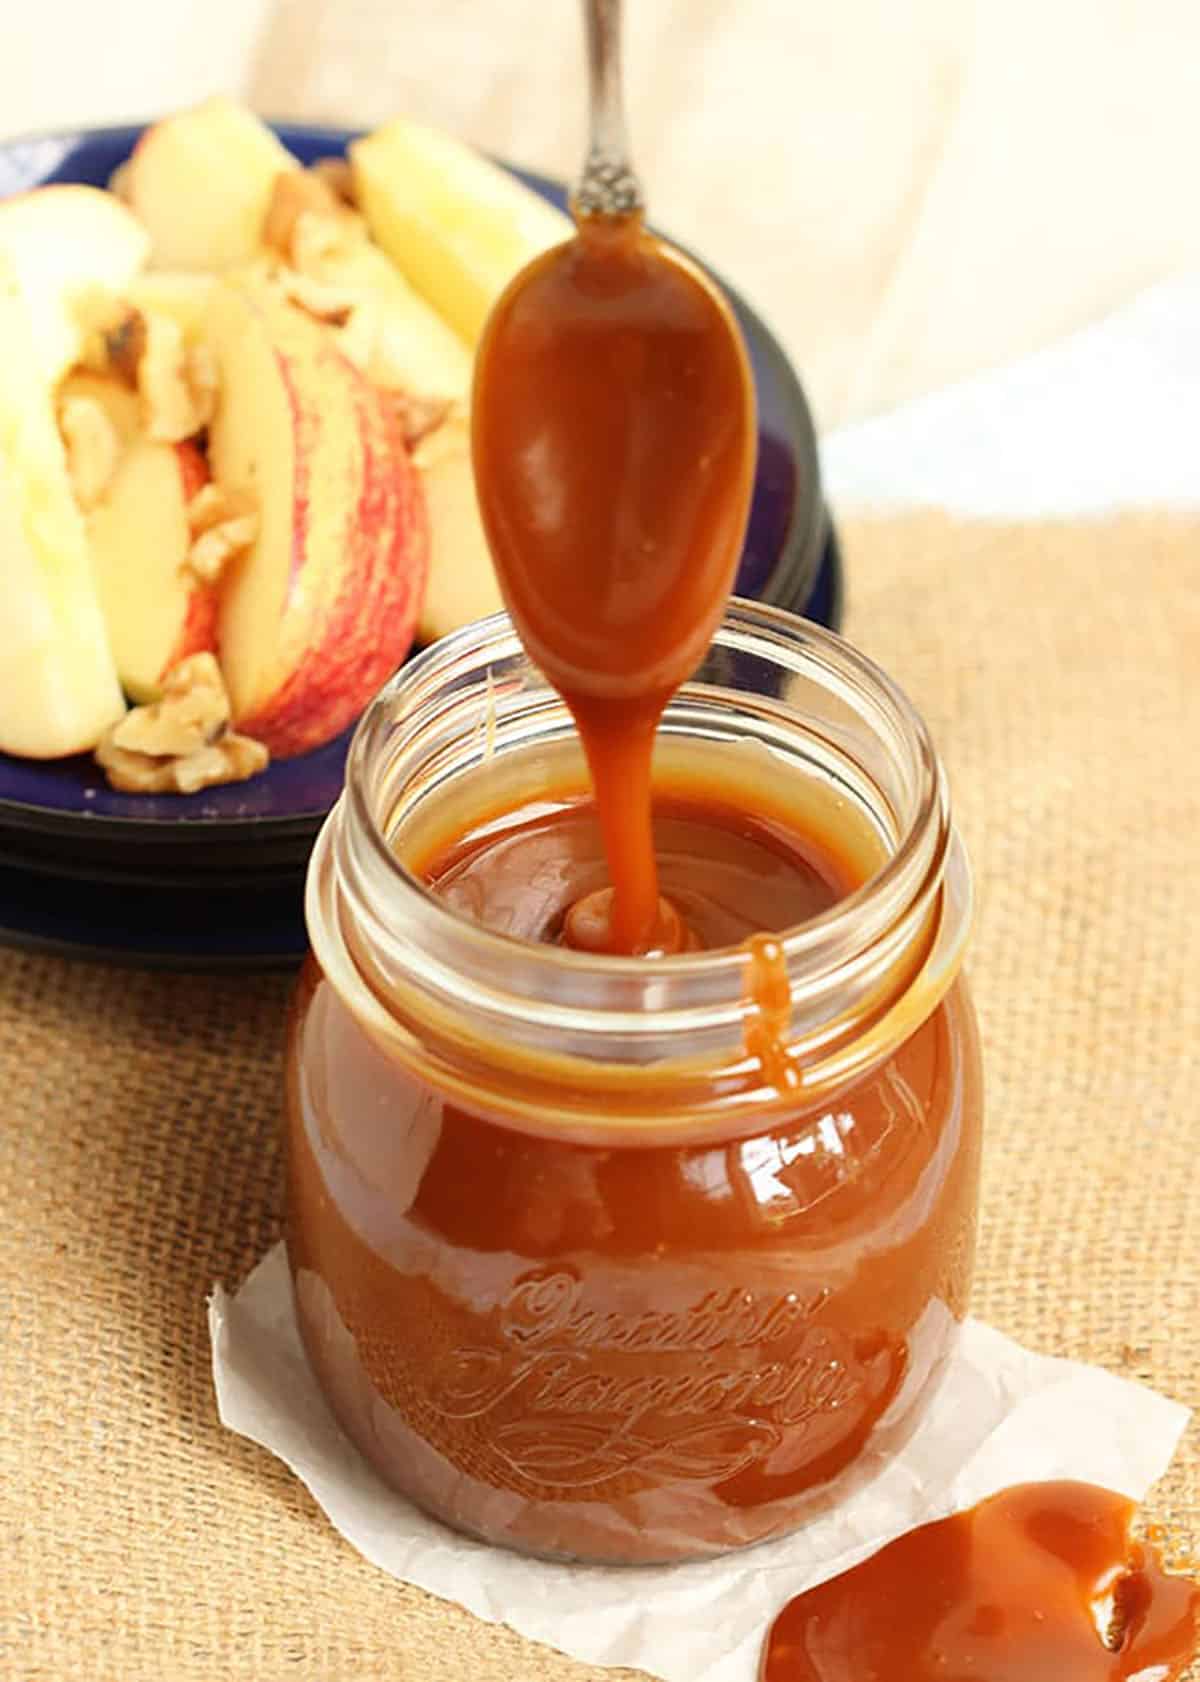 Caramel sauce in a glass jar with a spoon drizzling caramel into it with a plate of apples in the background.